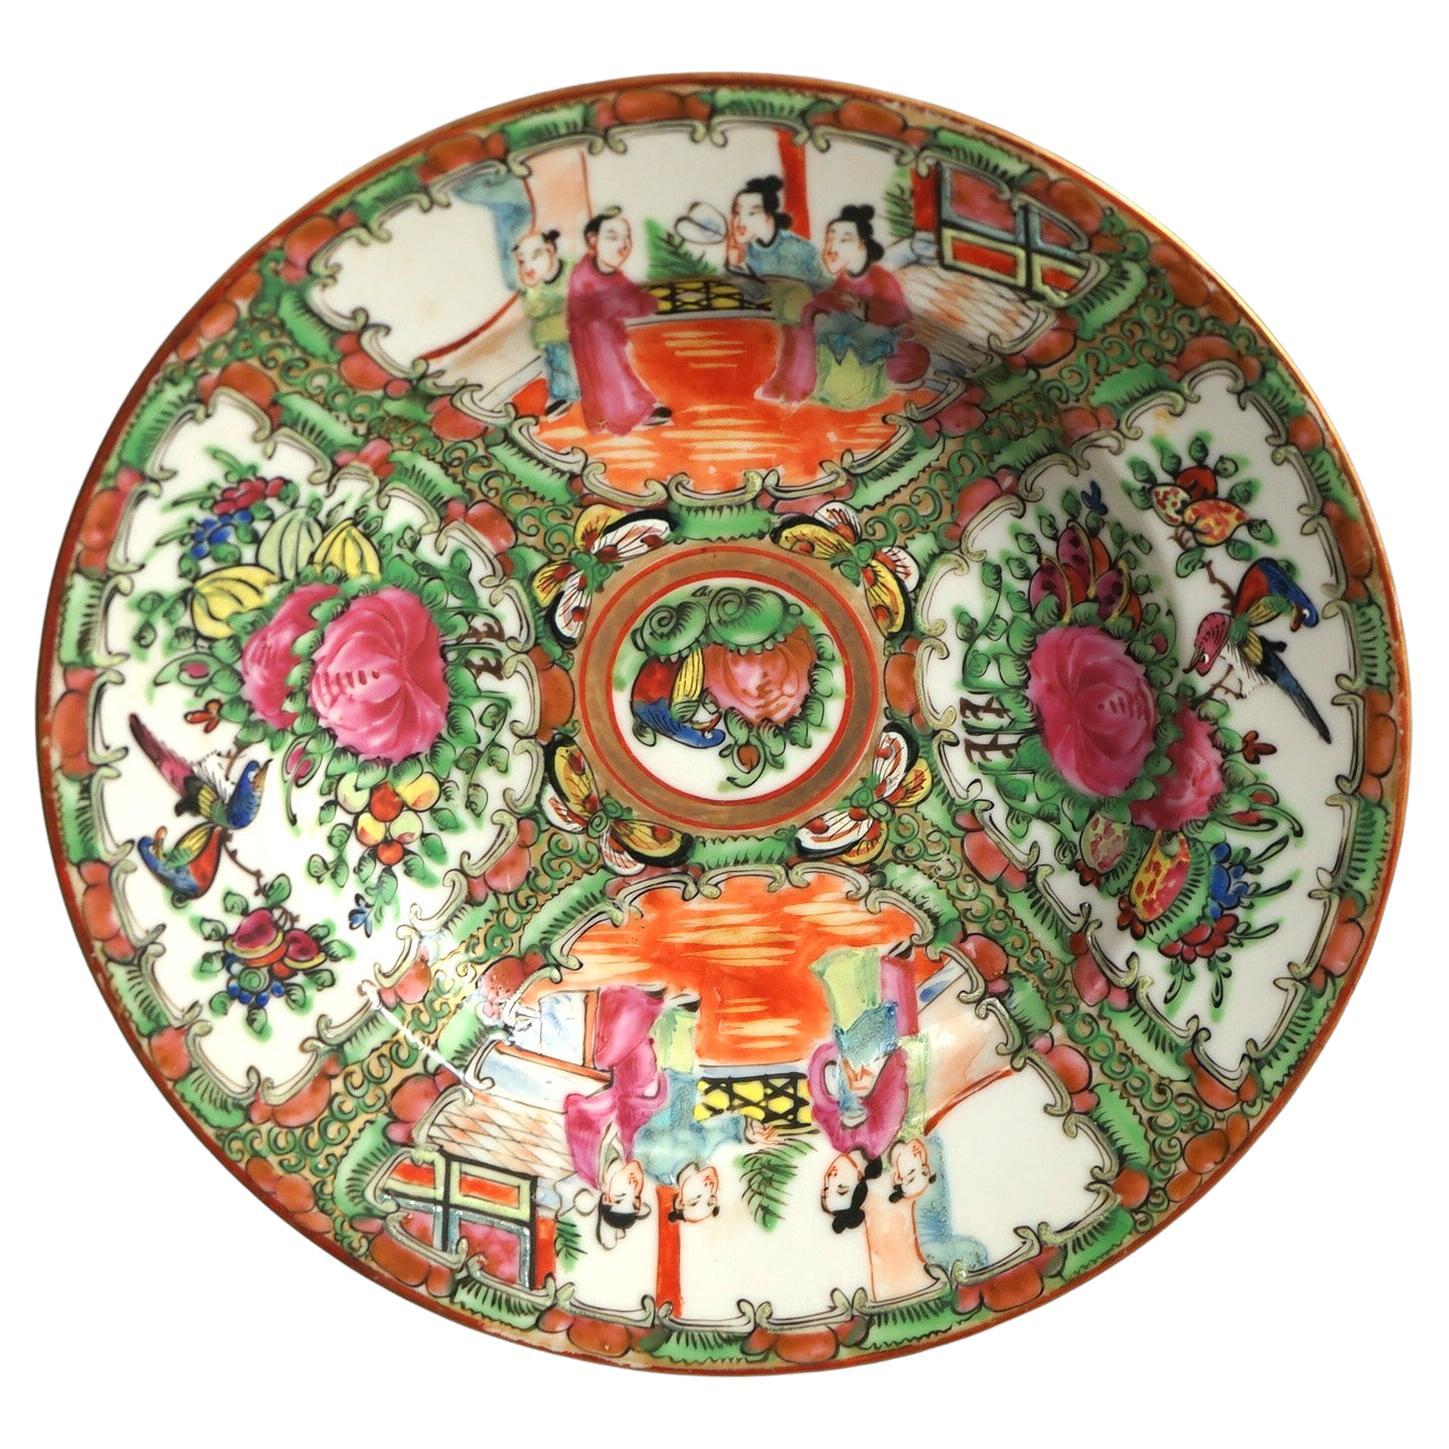 Antique Chinese Rose Medallion Porcelain Bowl with Gardens & Figures C1900